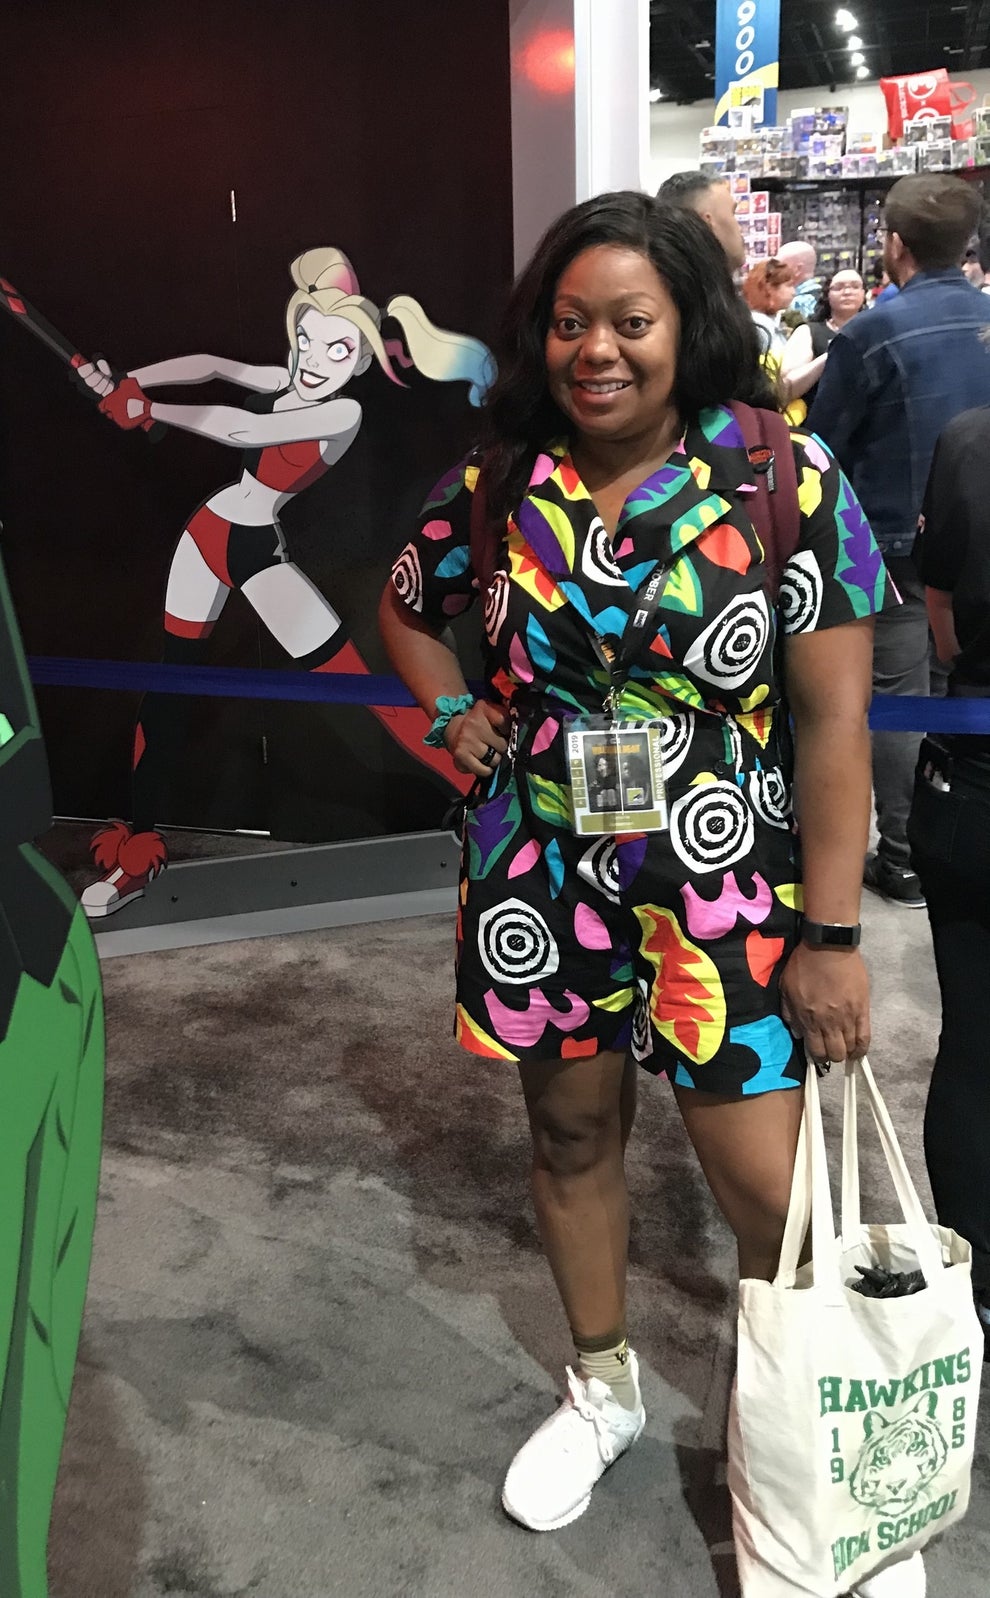 36 Black Cosplayers At San-Diego Comic Con 2019